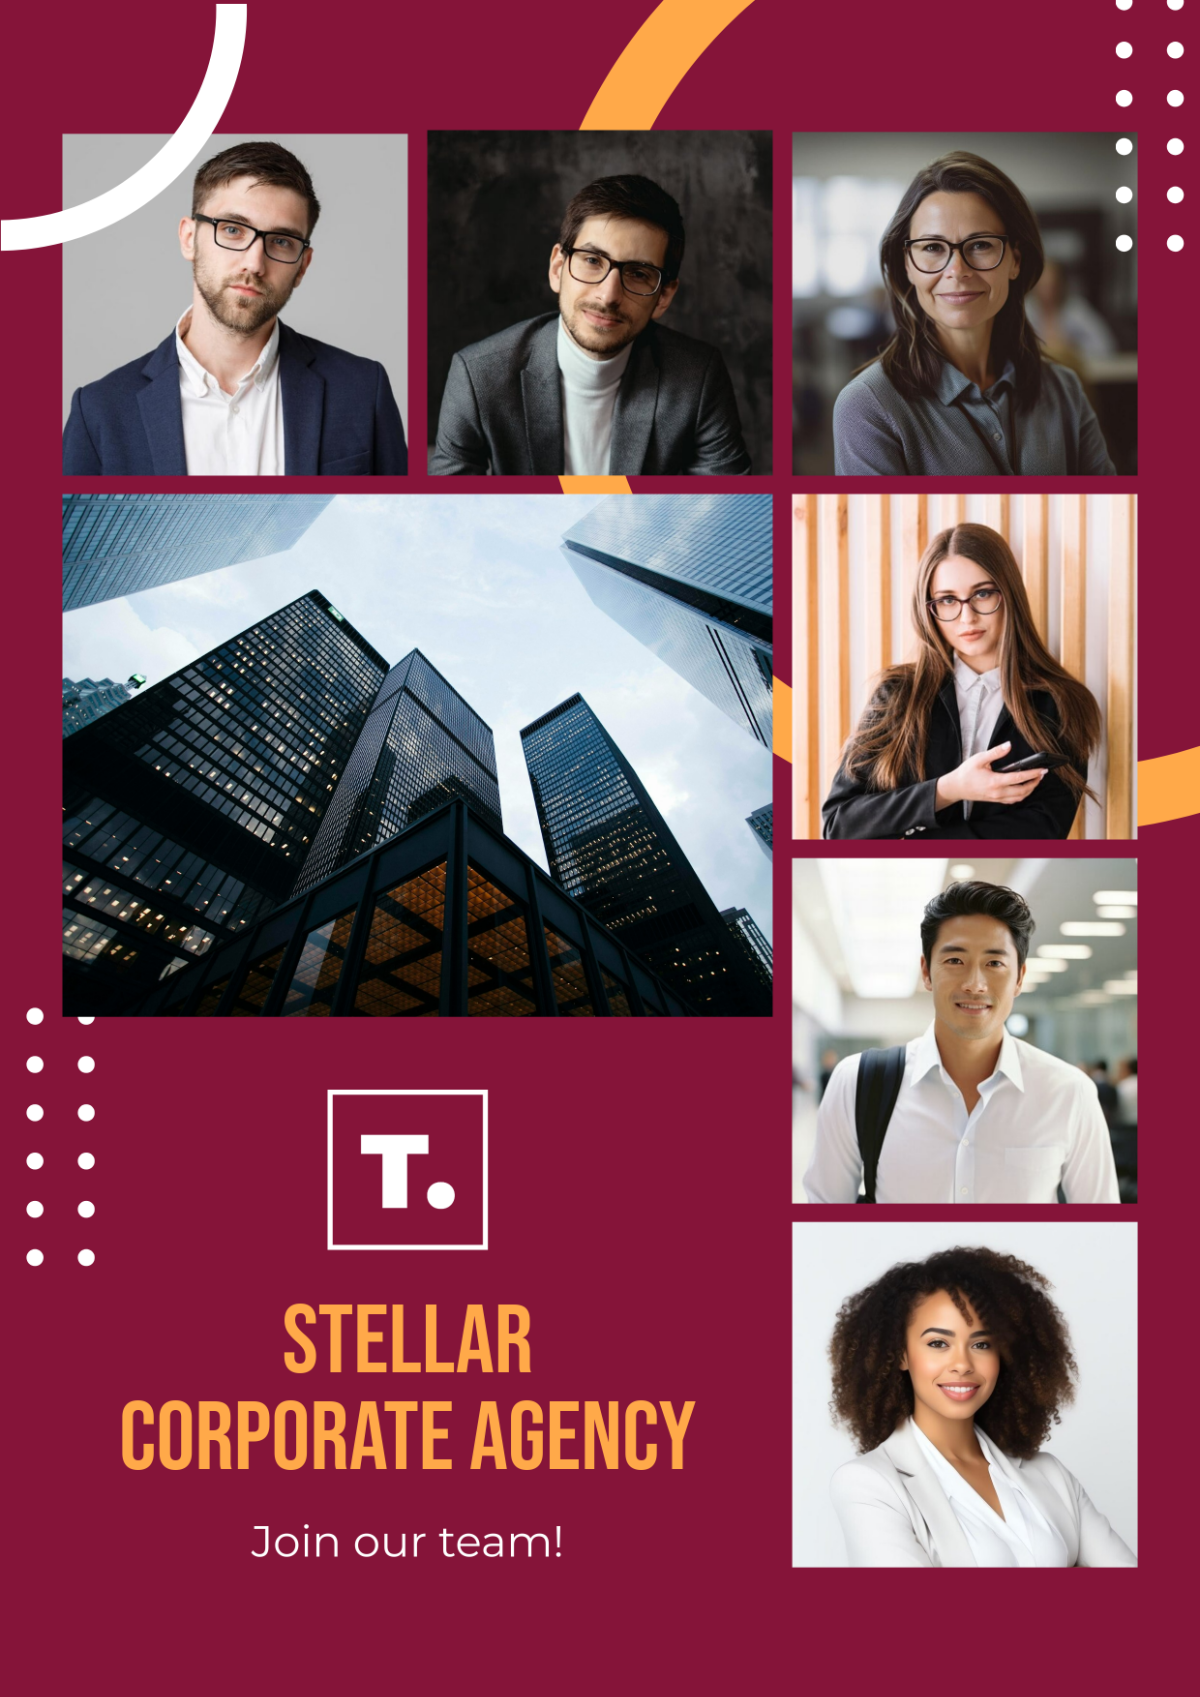 Free Corporate Agency Photo Collage Template